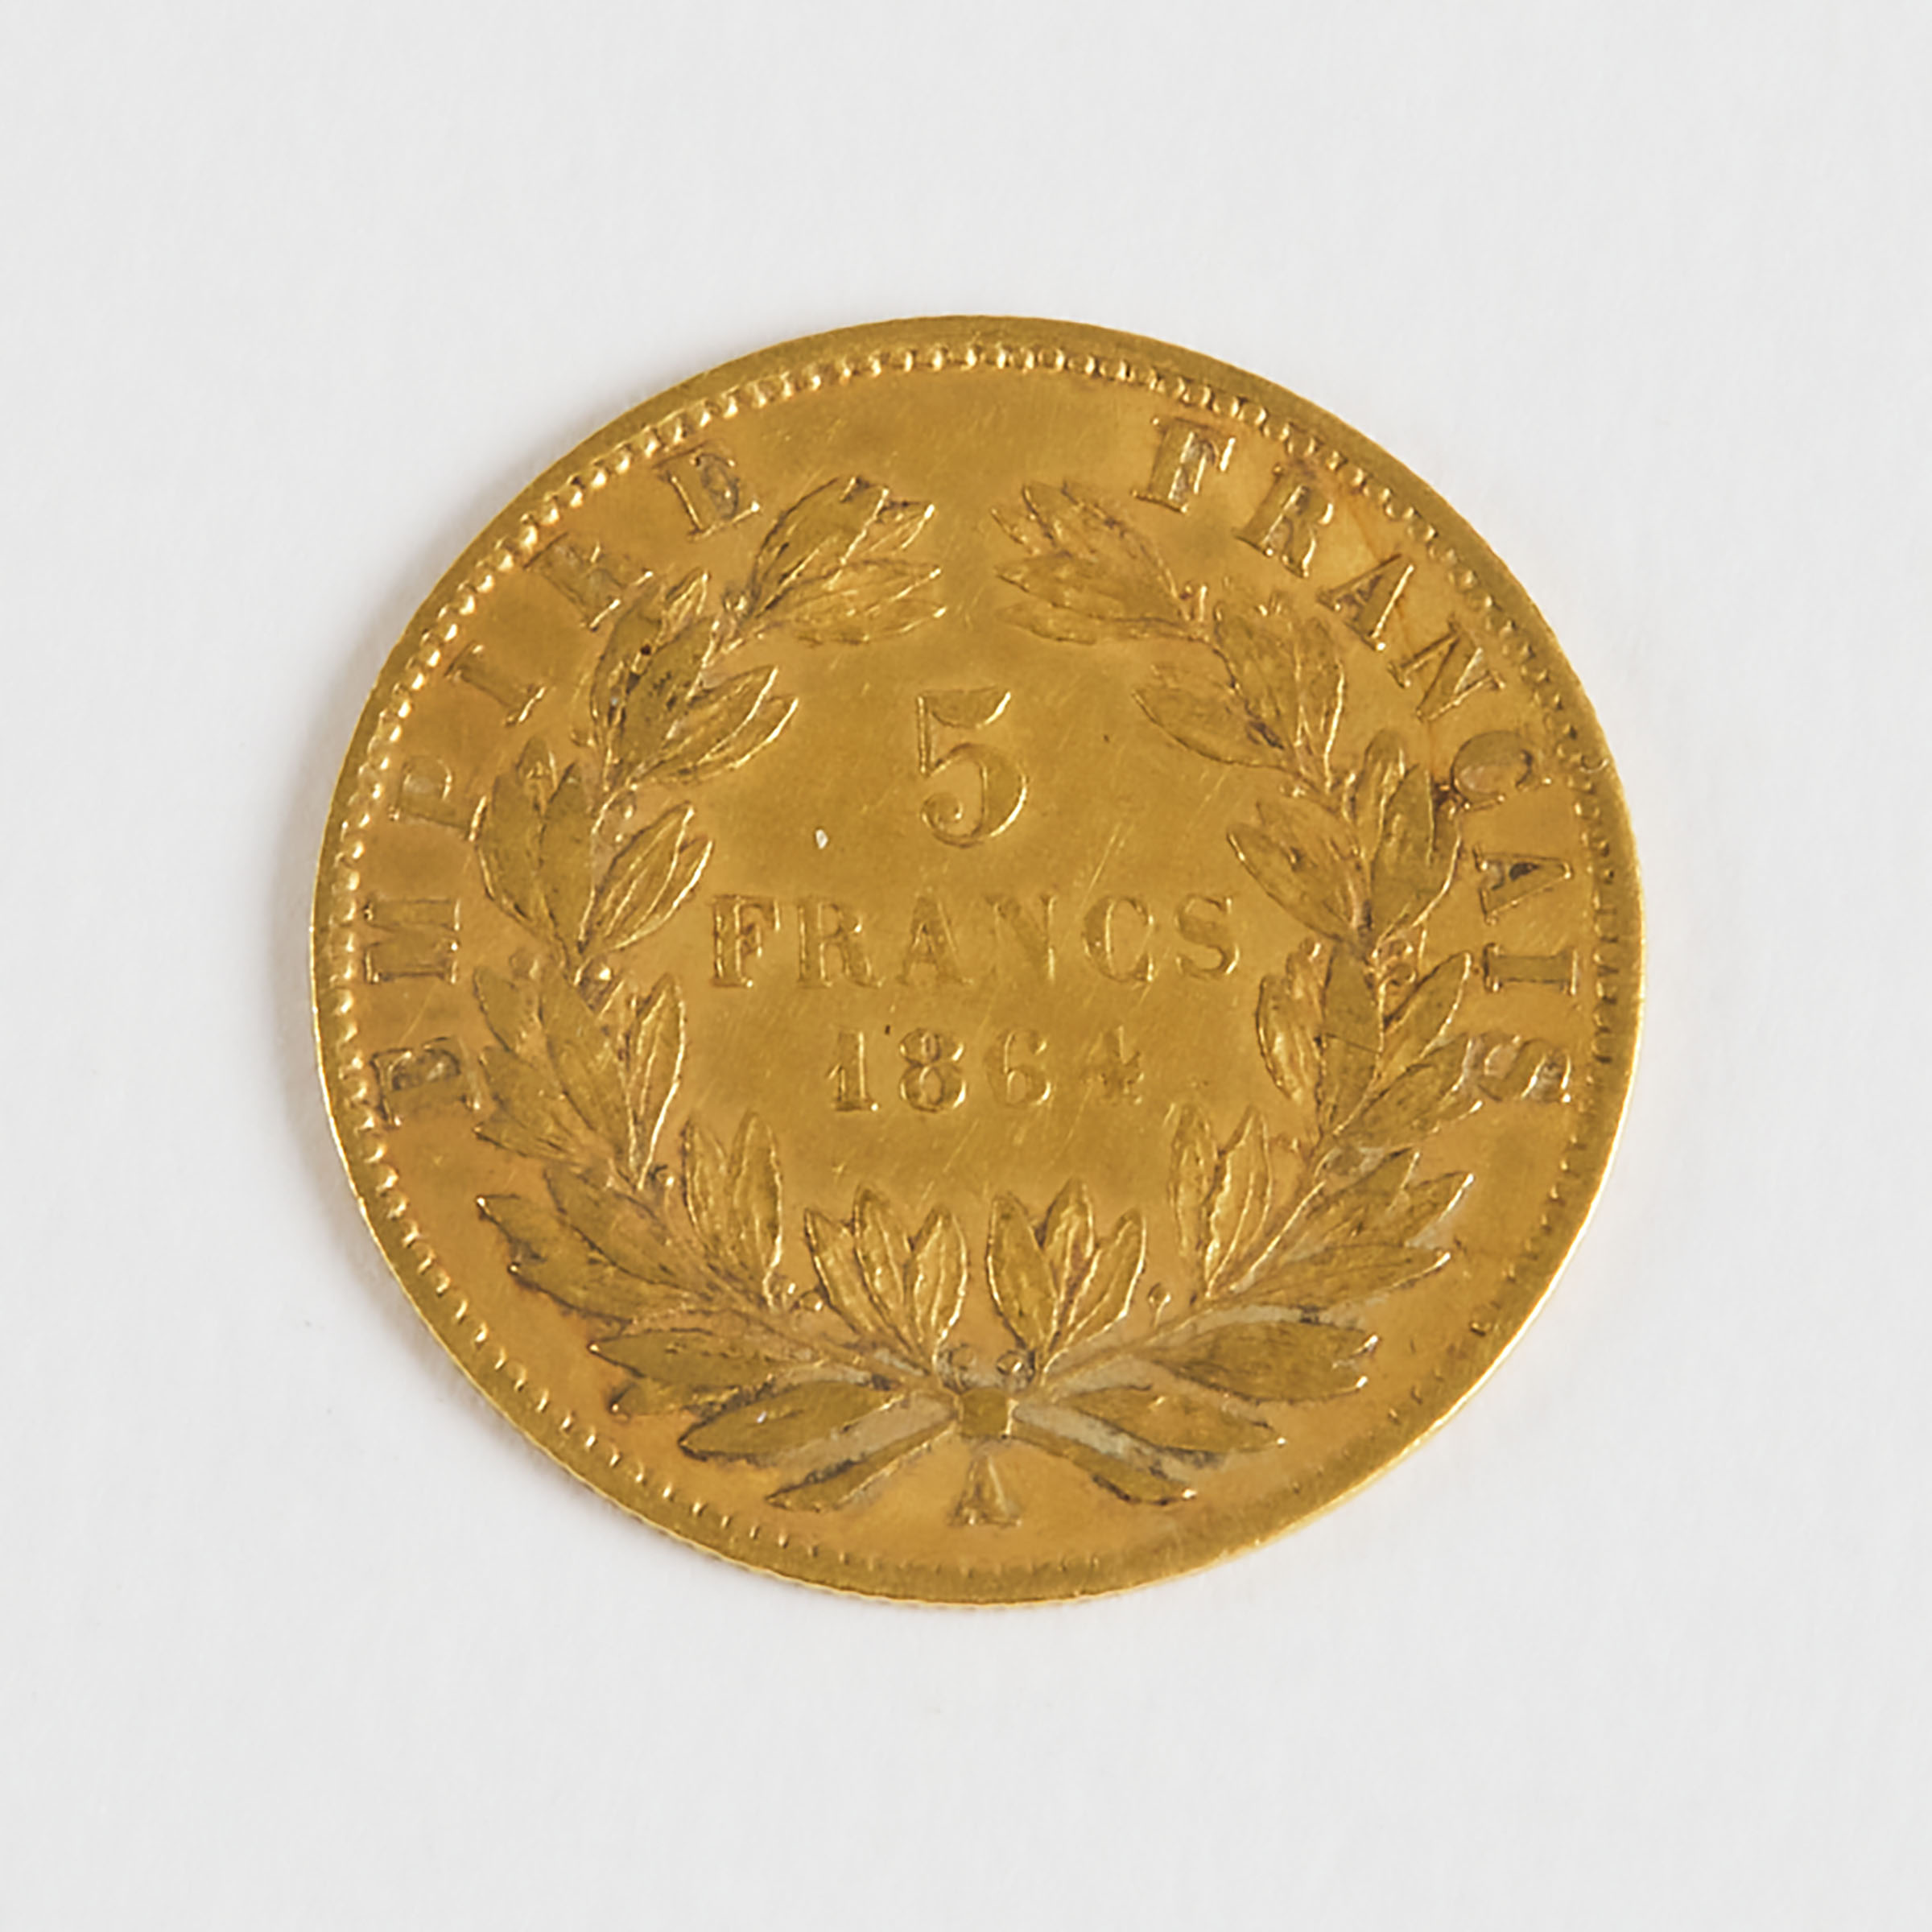 French 1864 5 Franc Gold Coin